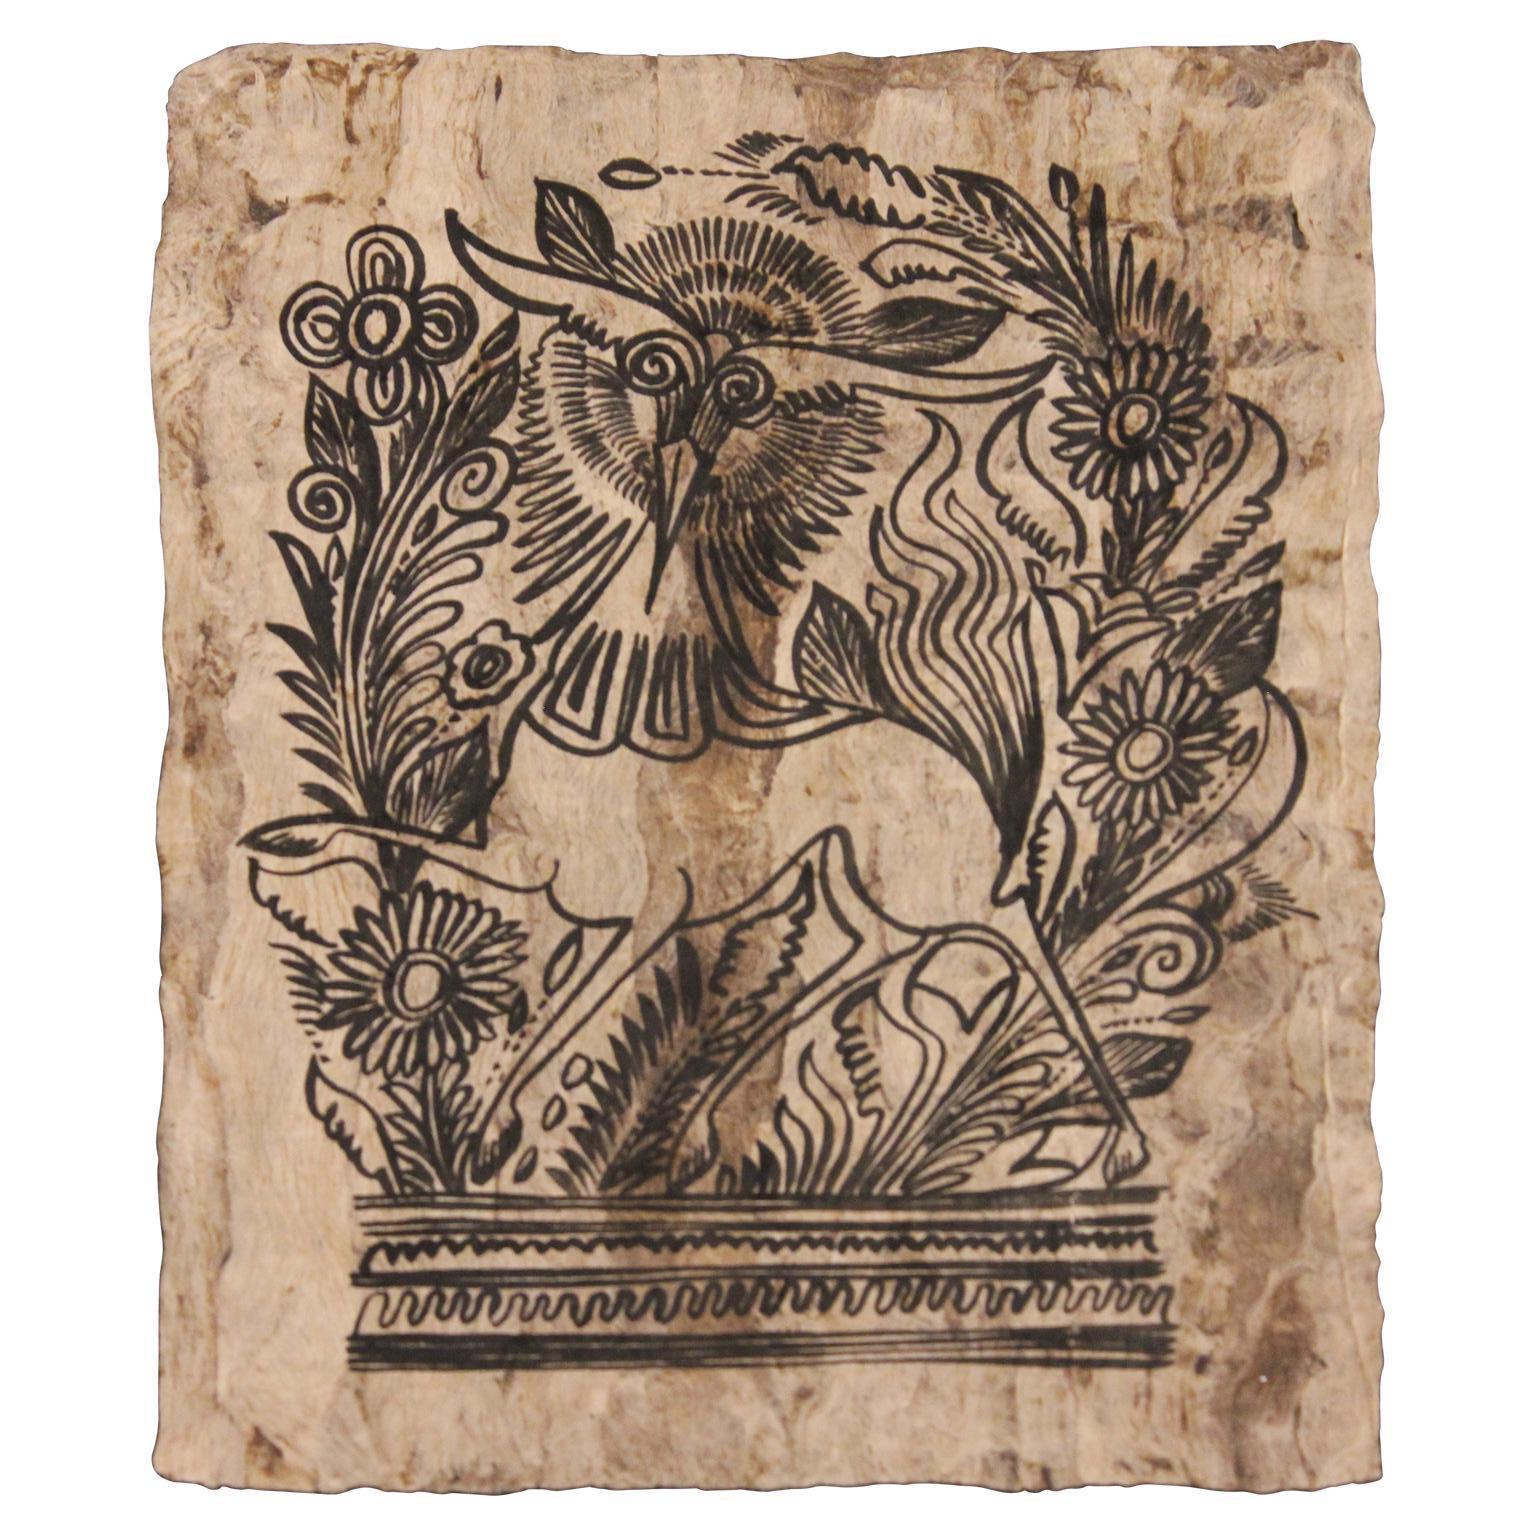 Unknown Figurative Art - Mythical Creature with Foliage Painted on Handmade Paper